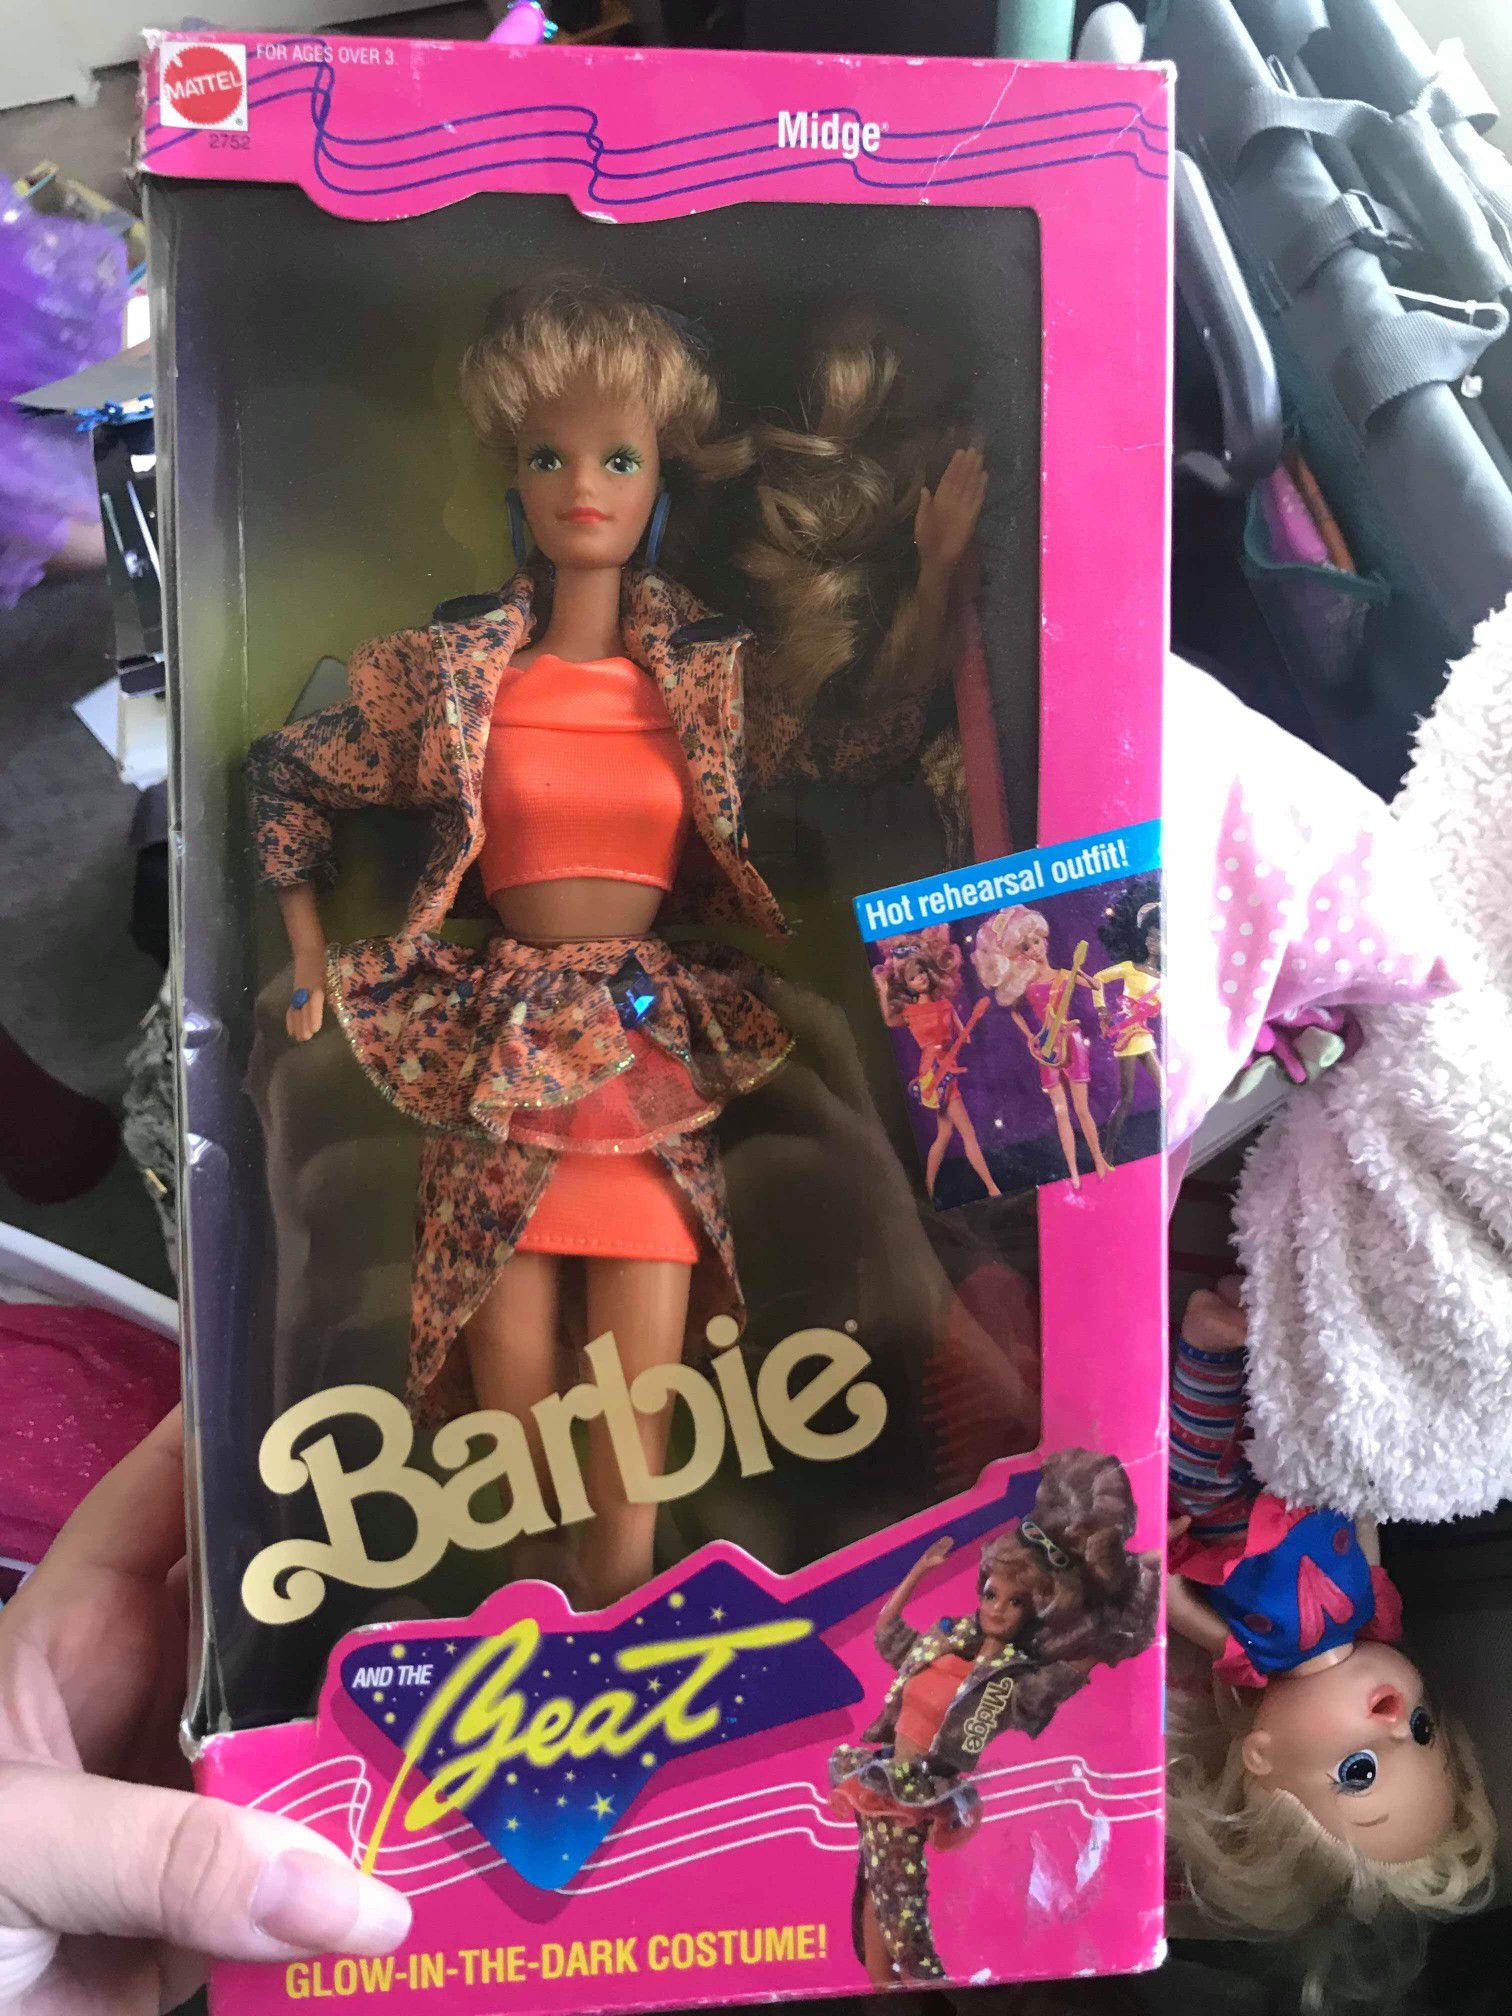 Barbie and the beat